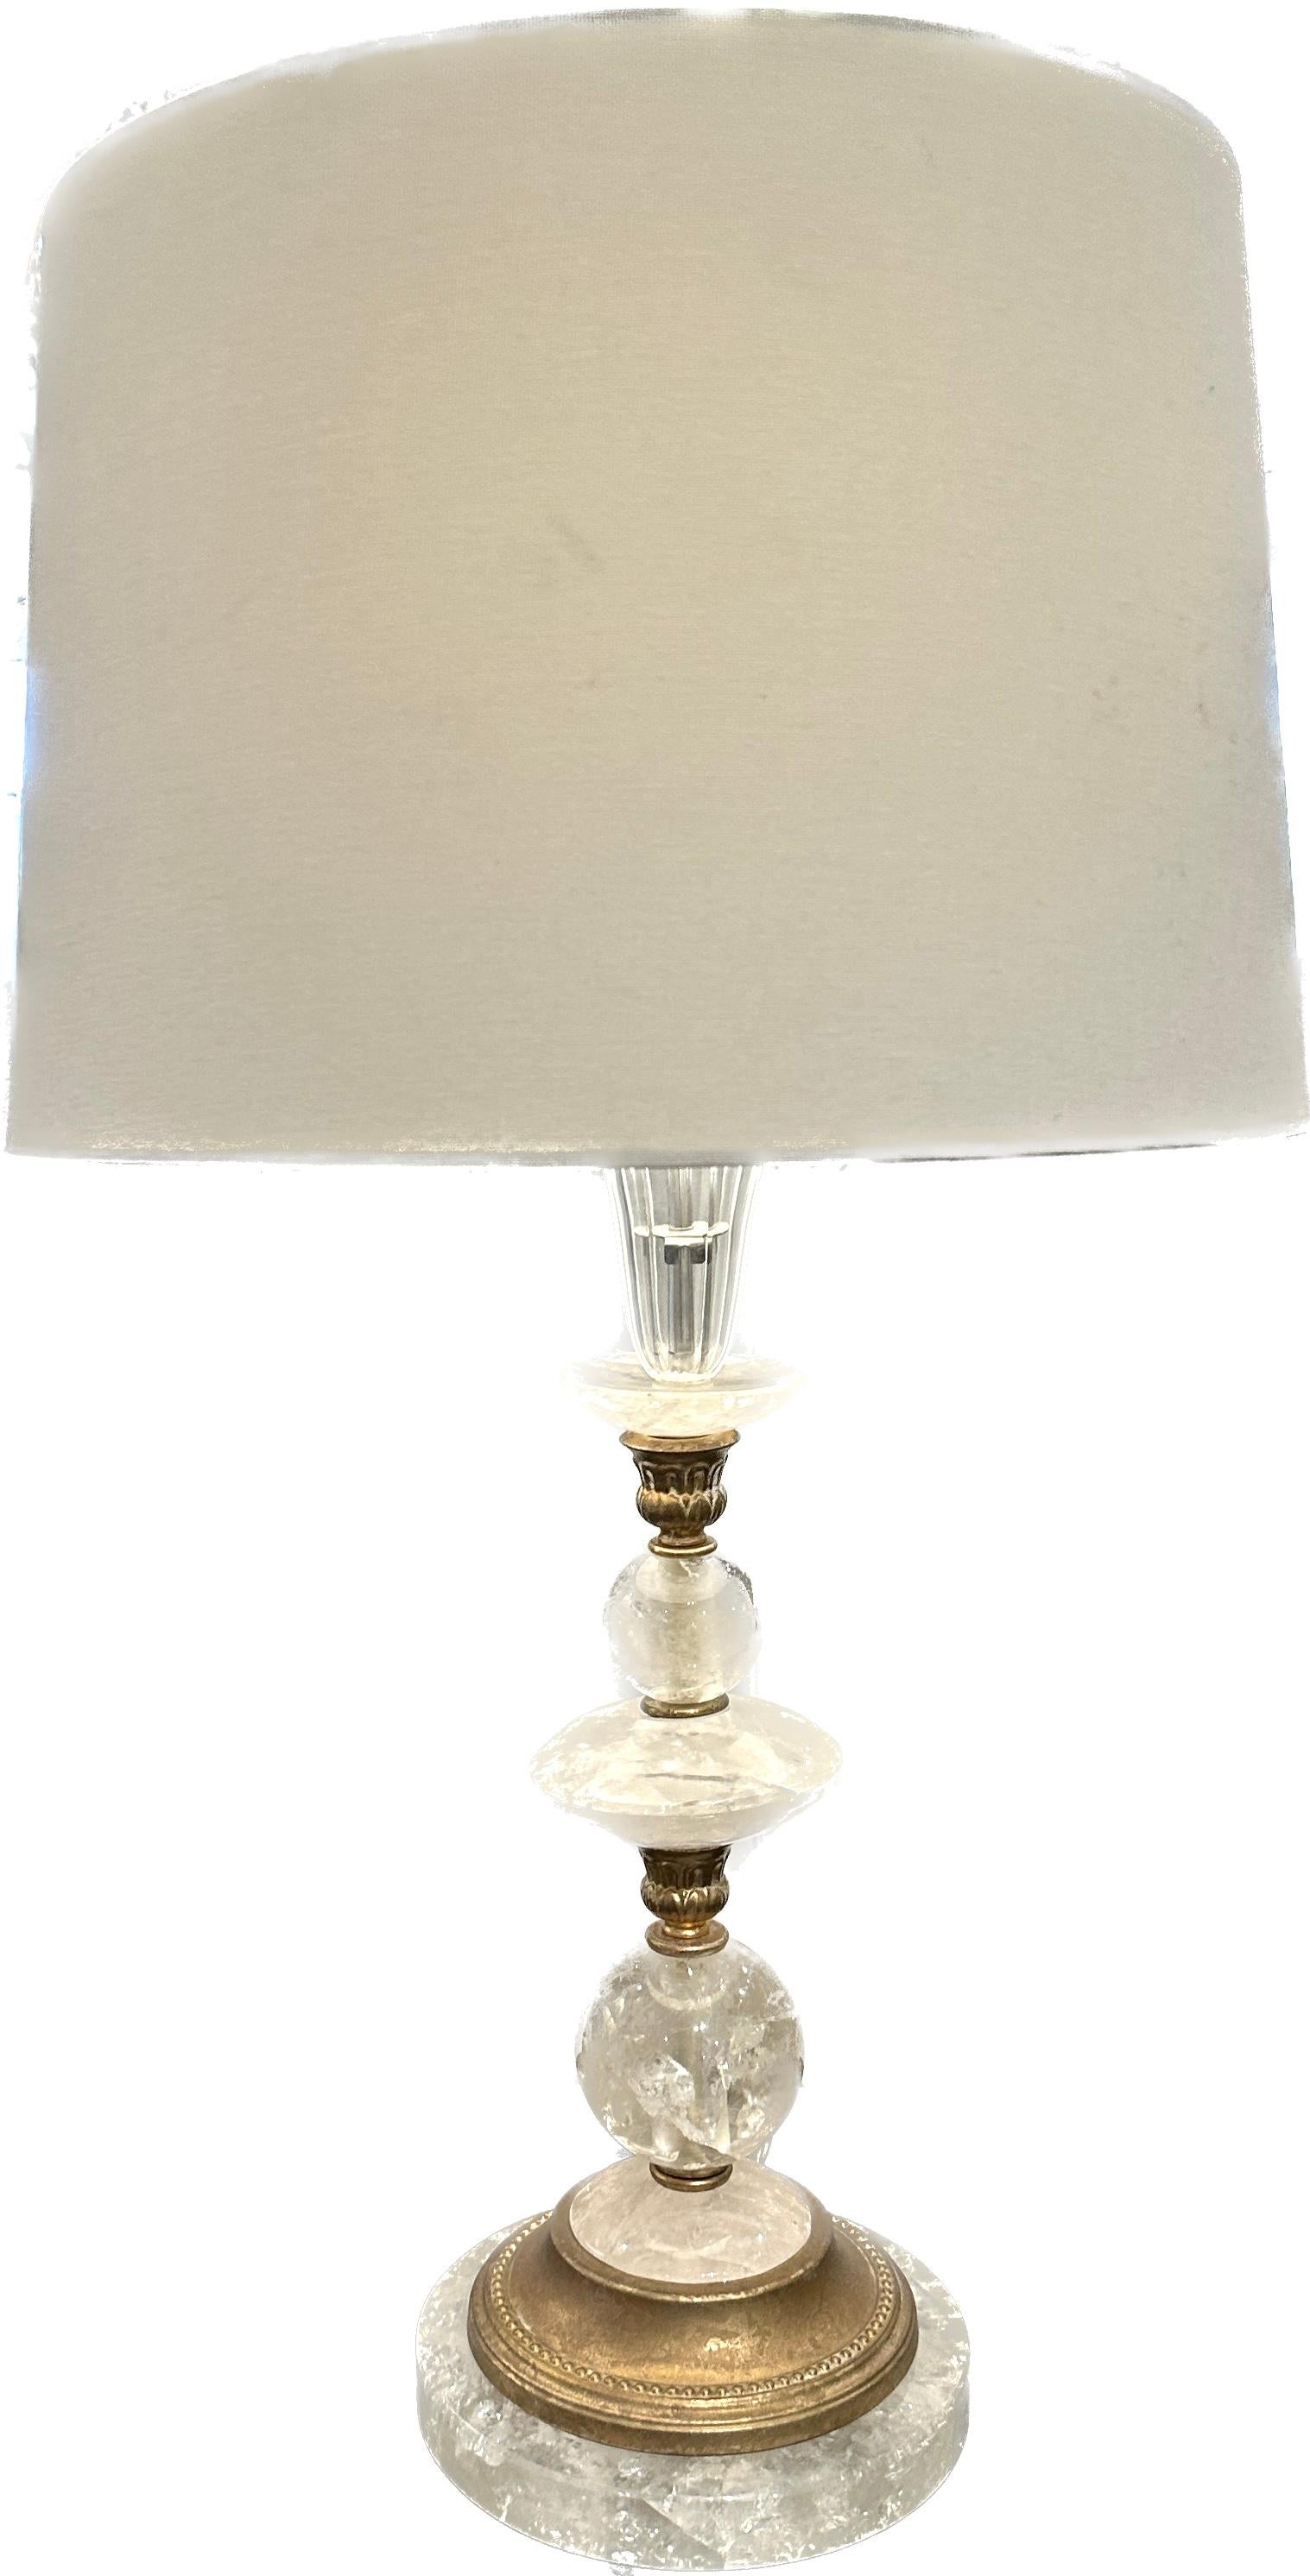 Hand-Crafted Vintage Rock Crystal Table Lamp For Sale